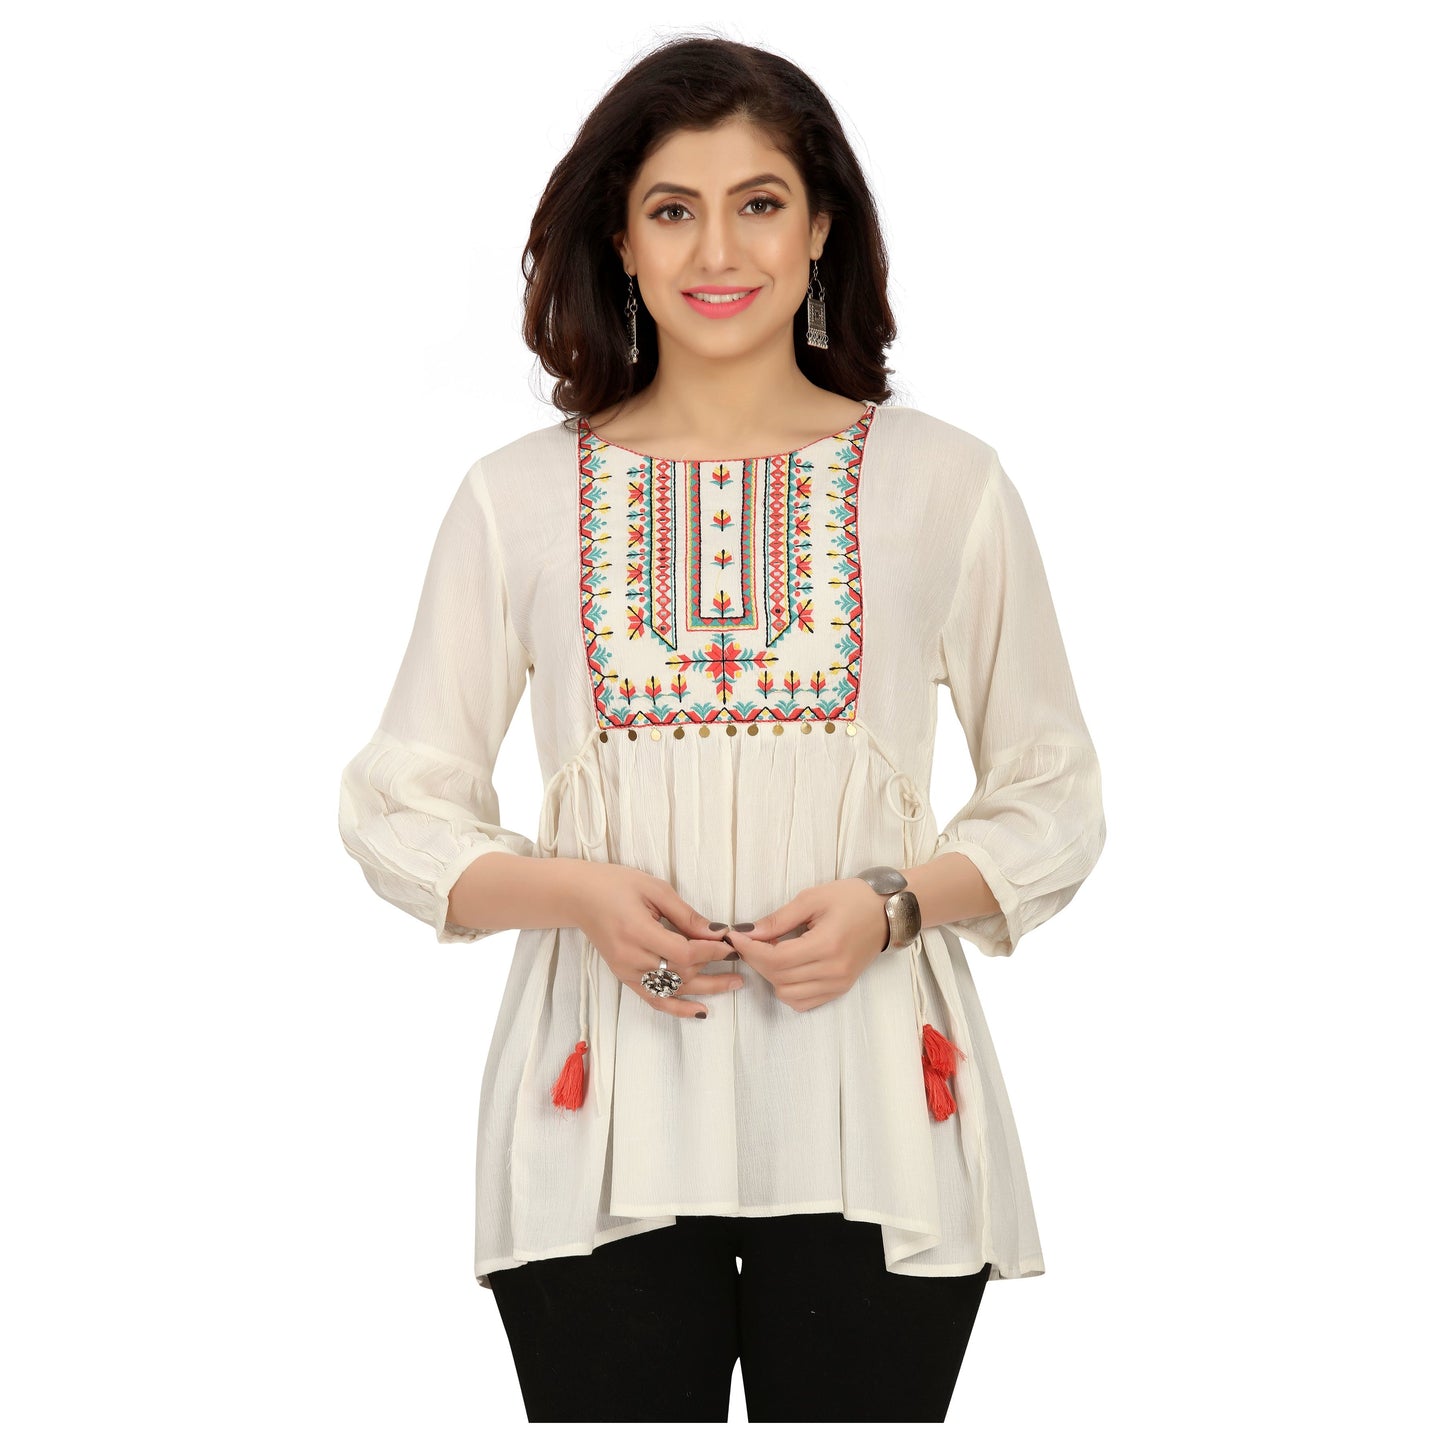 White short kurti with delicate embroidery on the neckline. Tunic top can be worn over jeans or skirt. Boho chic appeal to this Kurti with tassels on the side. 